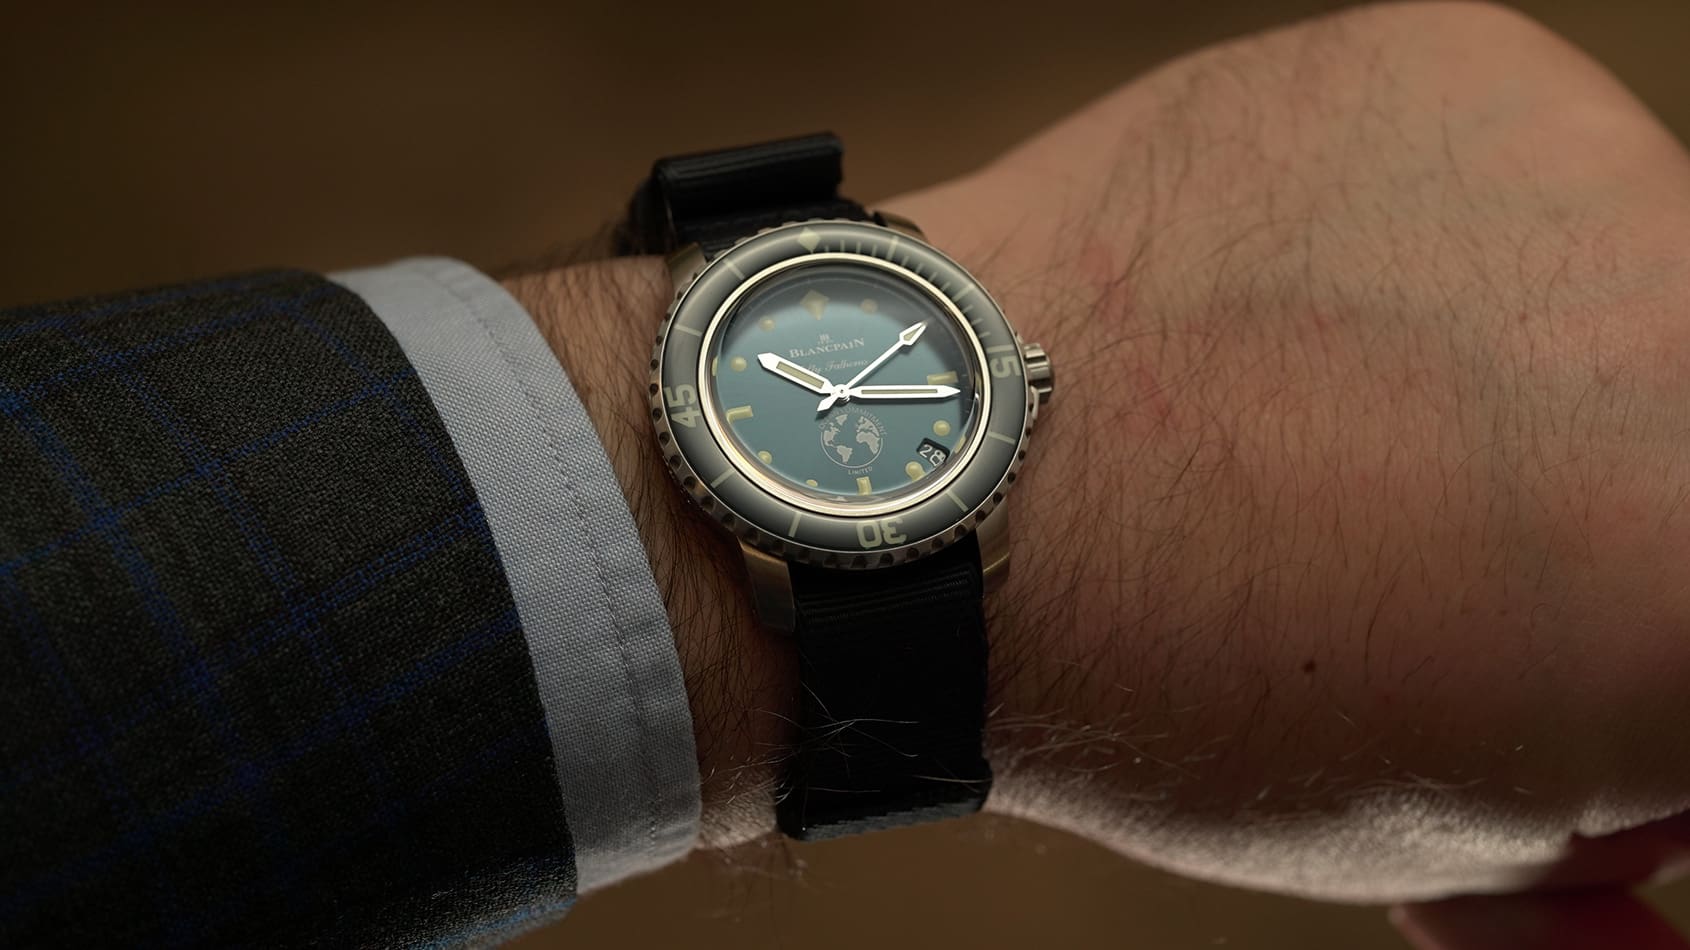 VIDEO: Diving into the Blancpain Fifty Fathoms Ocean Commitment III